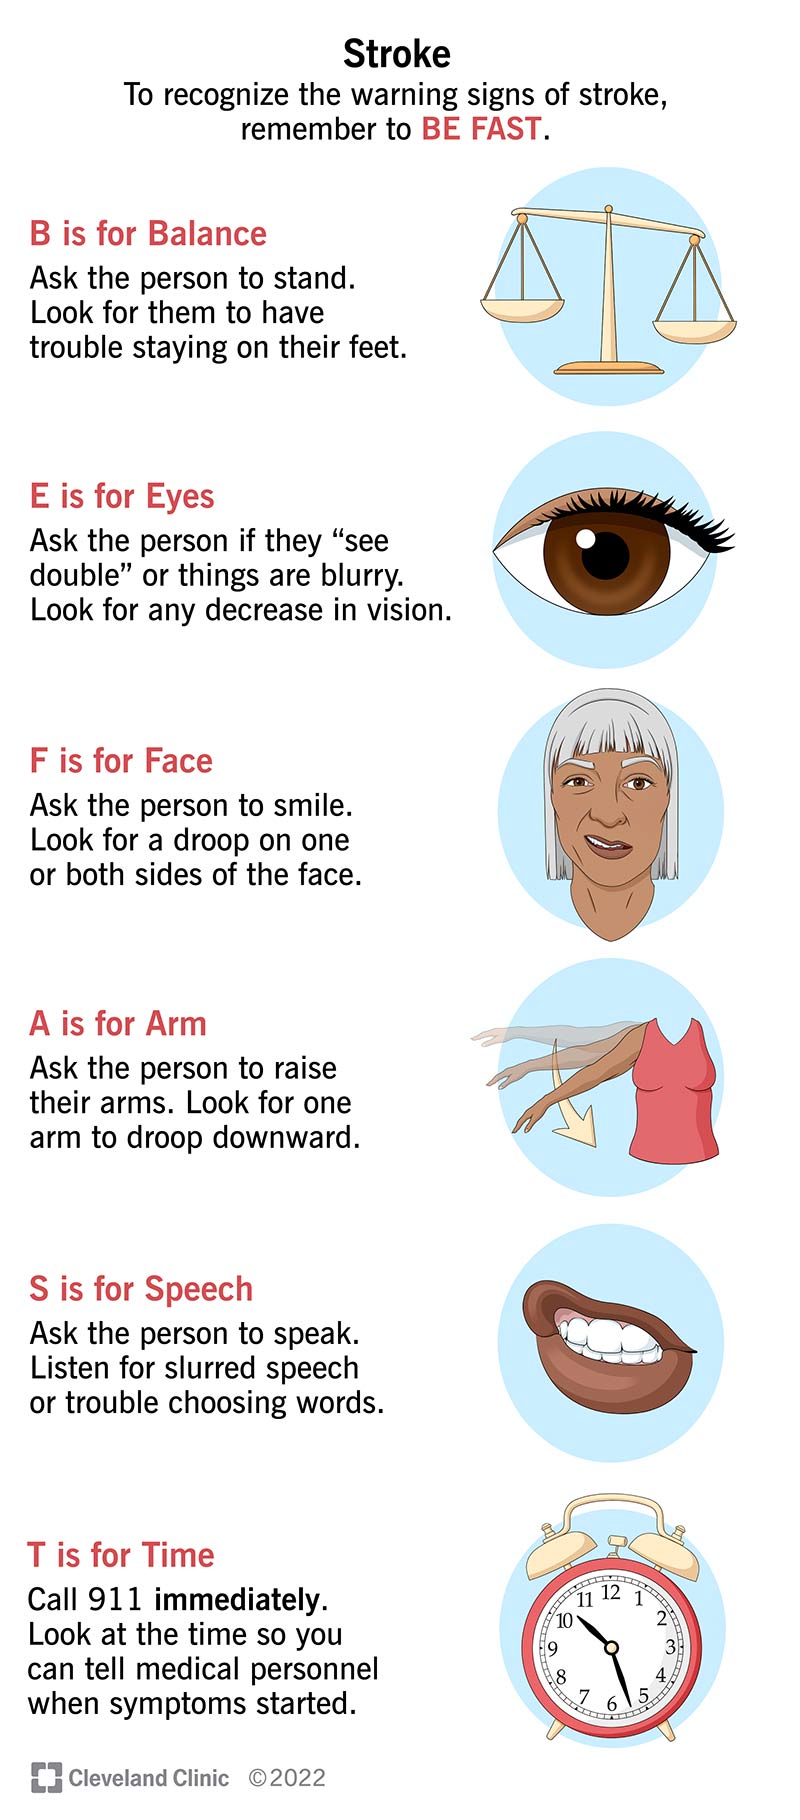 F is for face droop, A is for uneven arm weakness, S is for speech problems and T is for time. Getting fast care is critical.